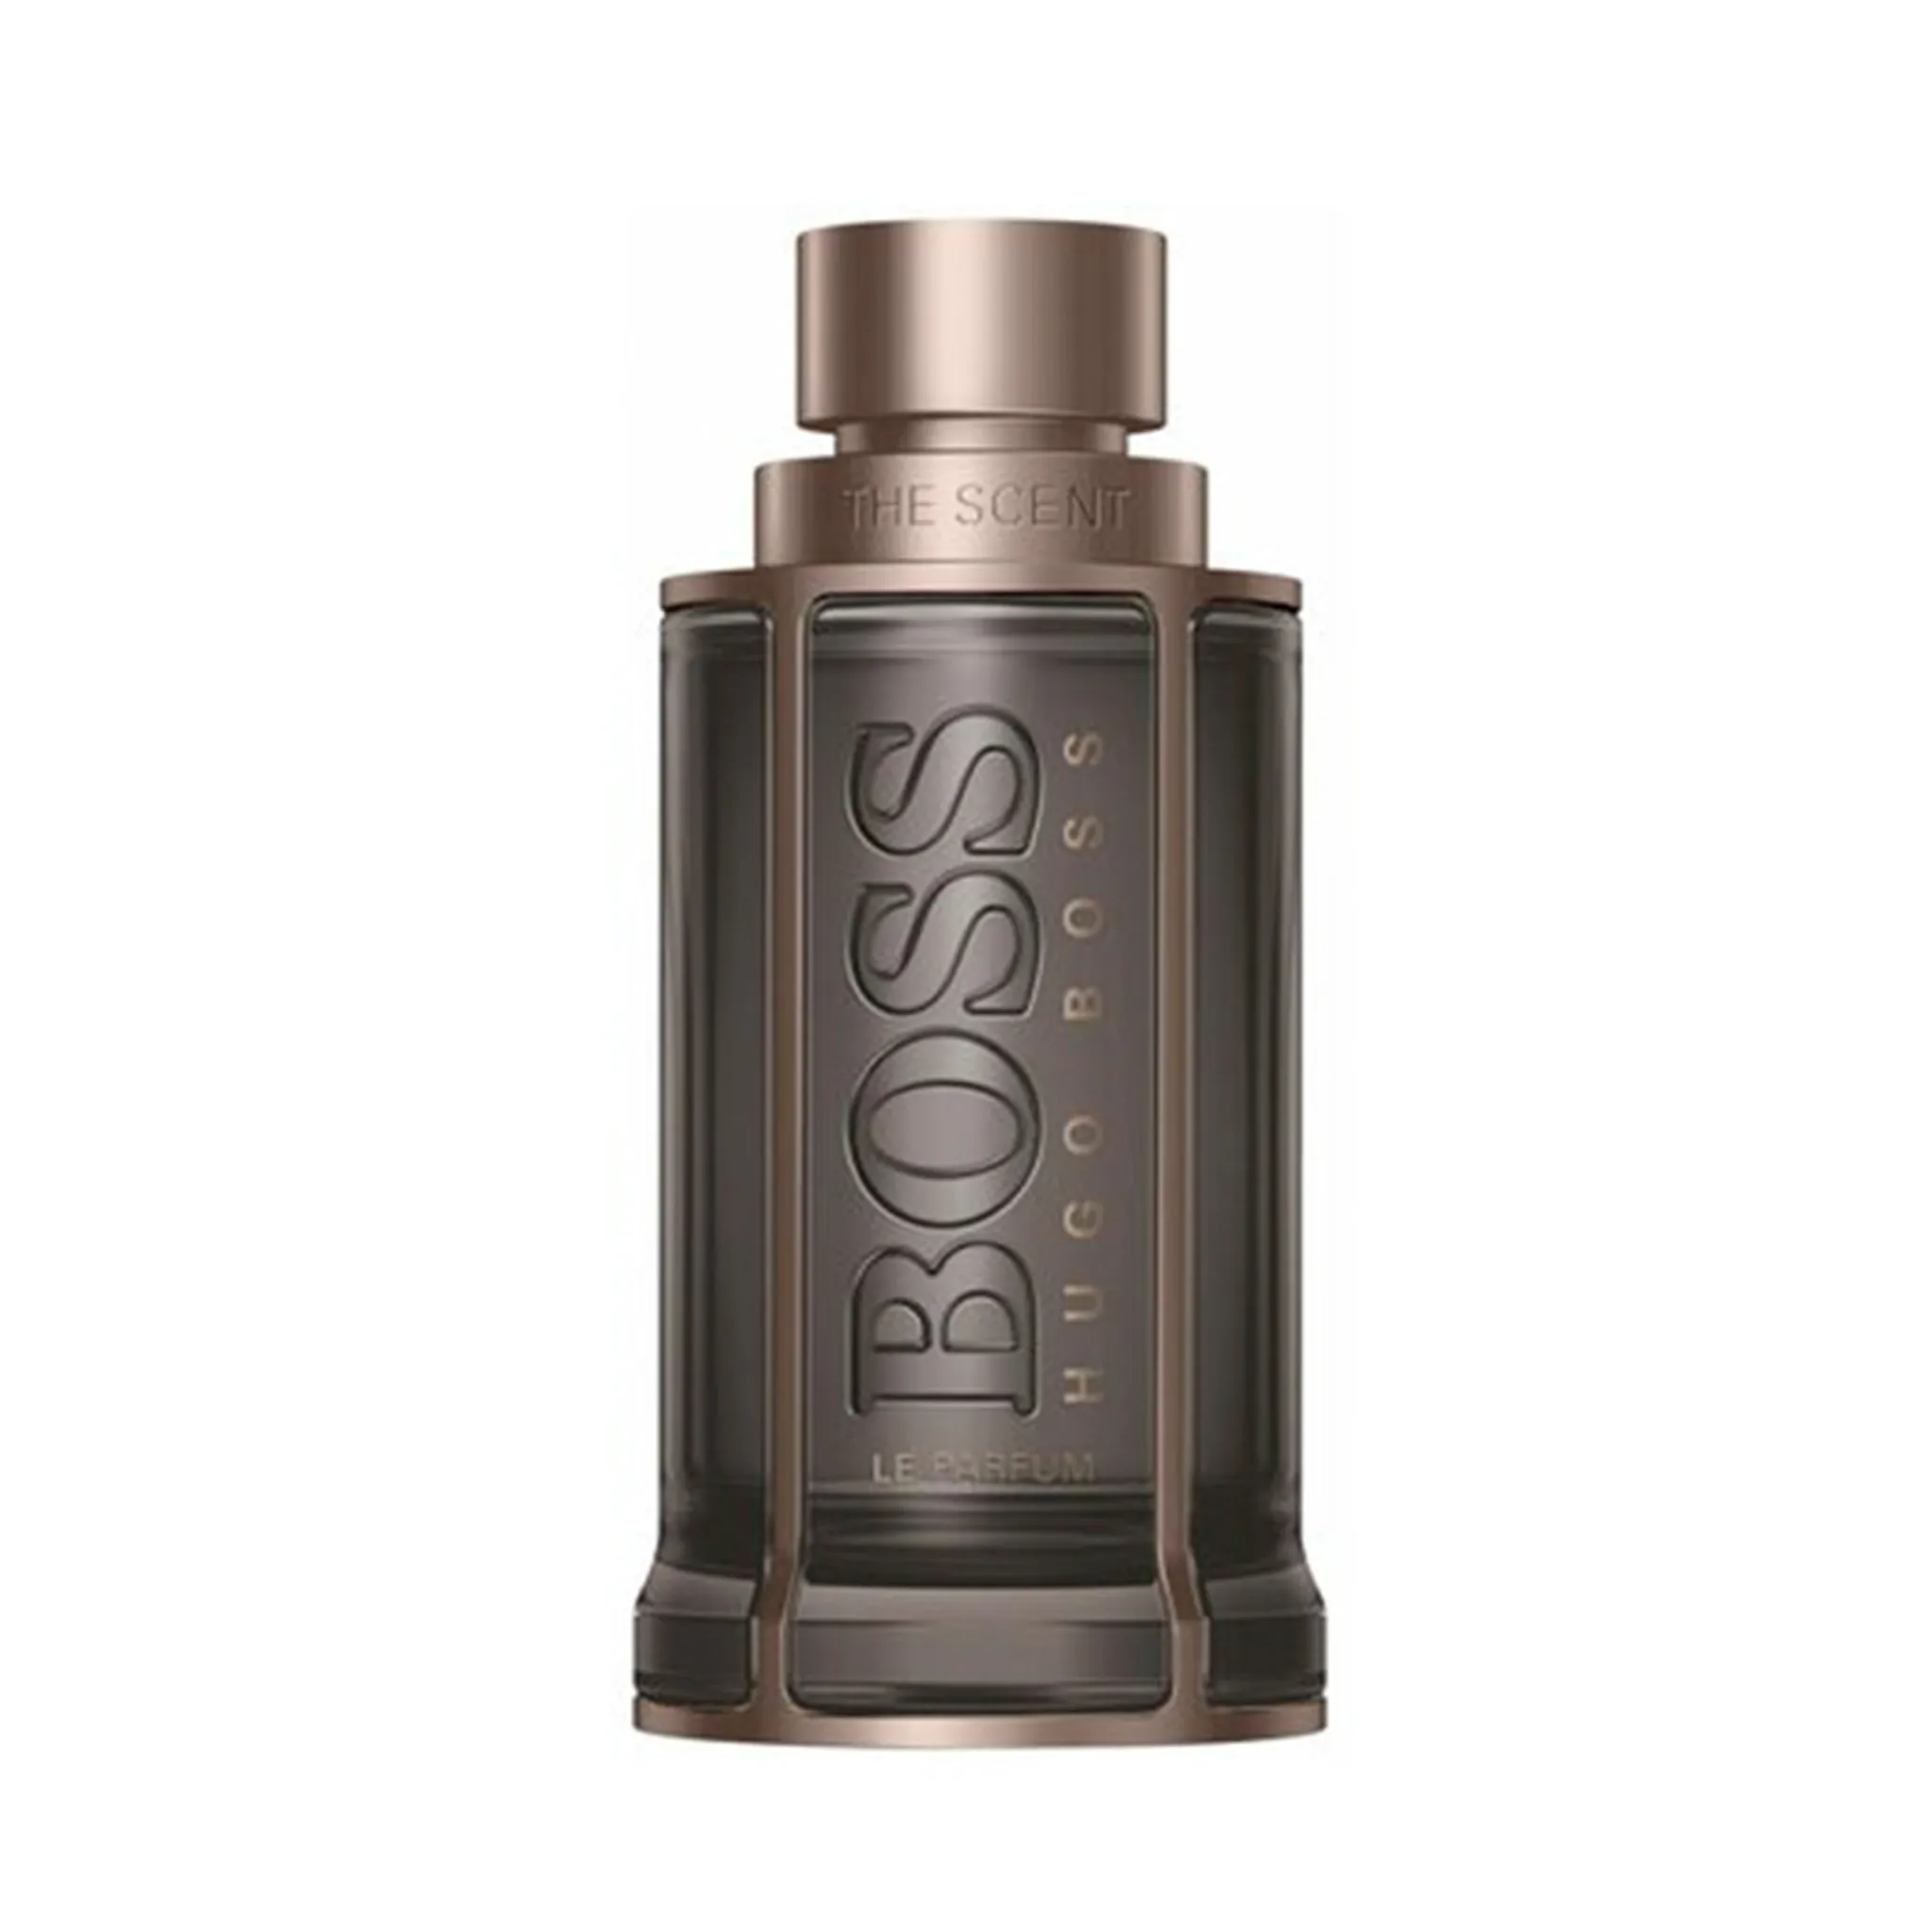 Hugo Boss The Scent Le Parfum For Him 50ml